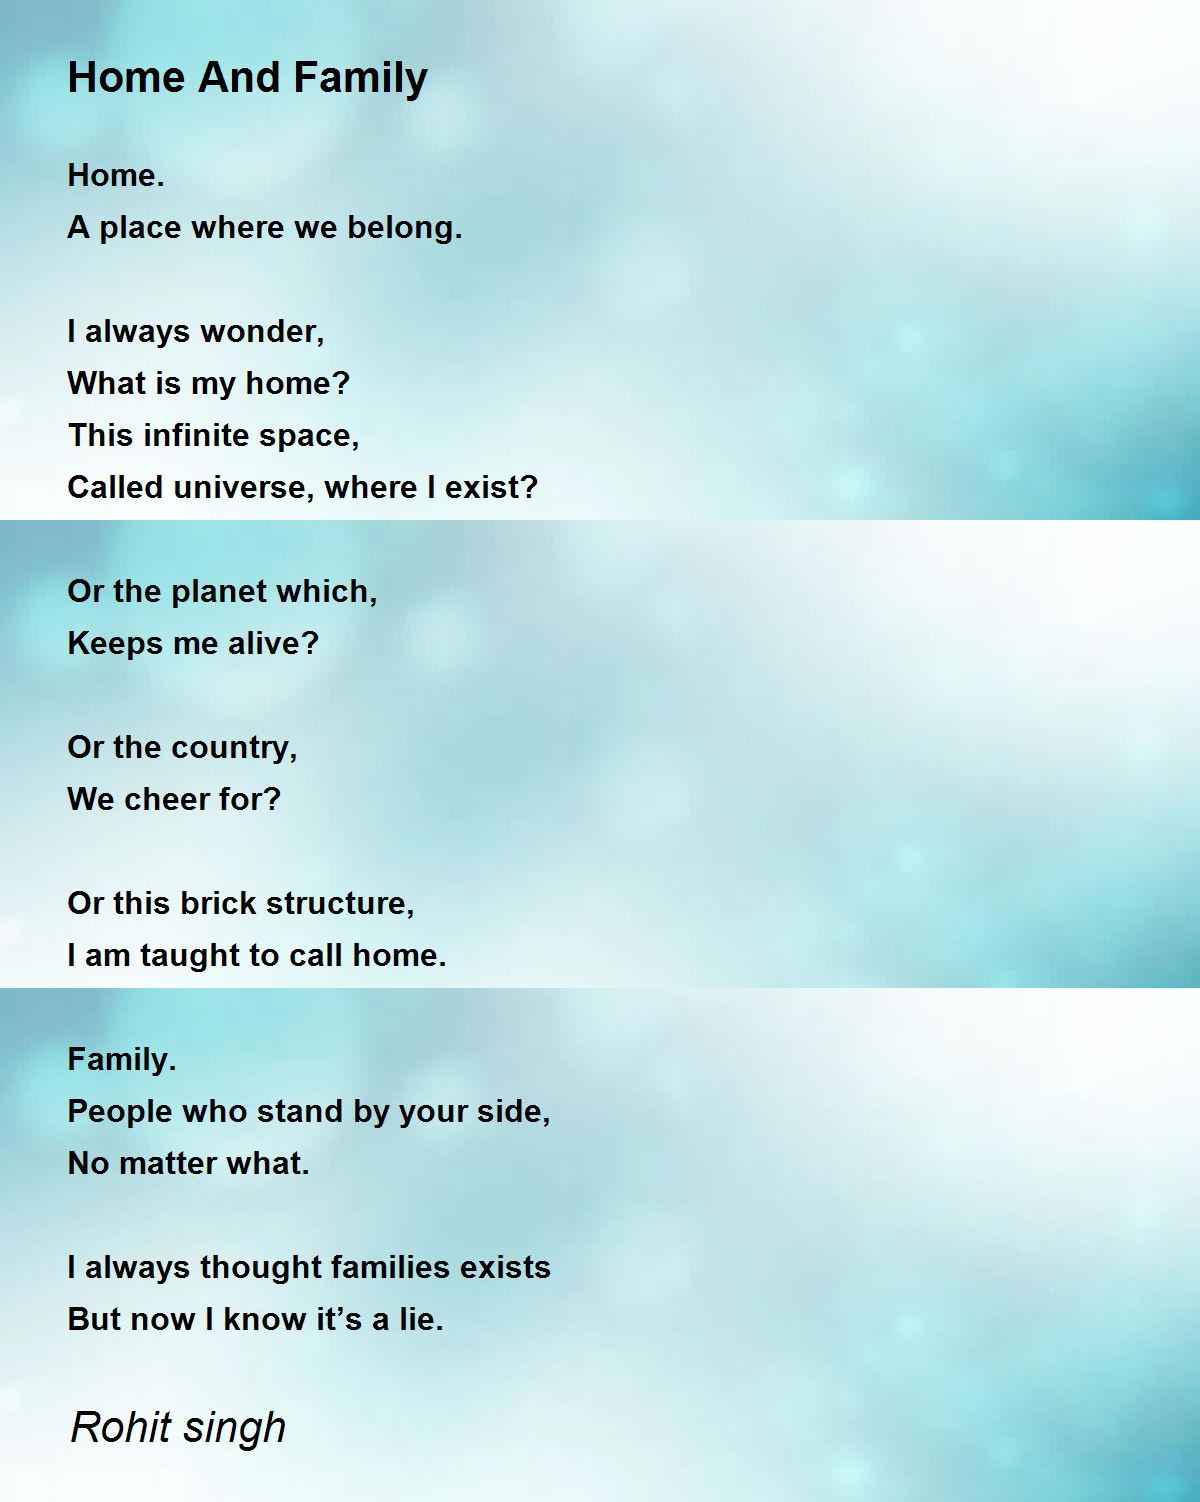 Home And Family Poem By Rohit Singh